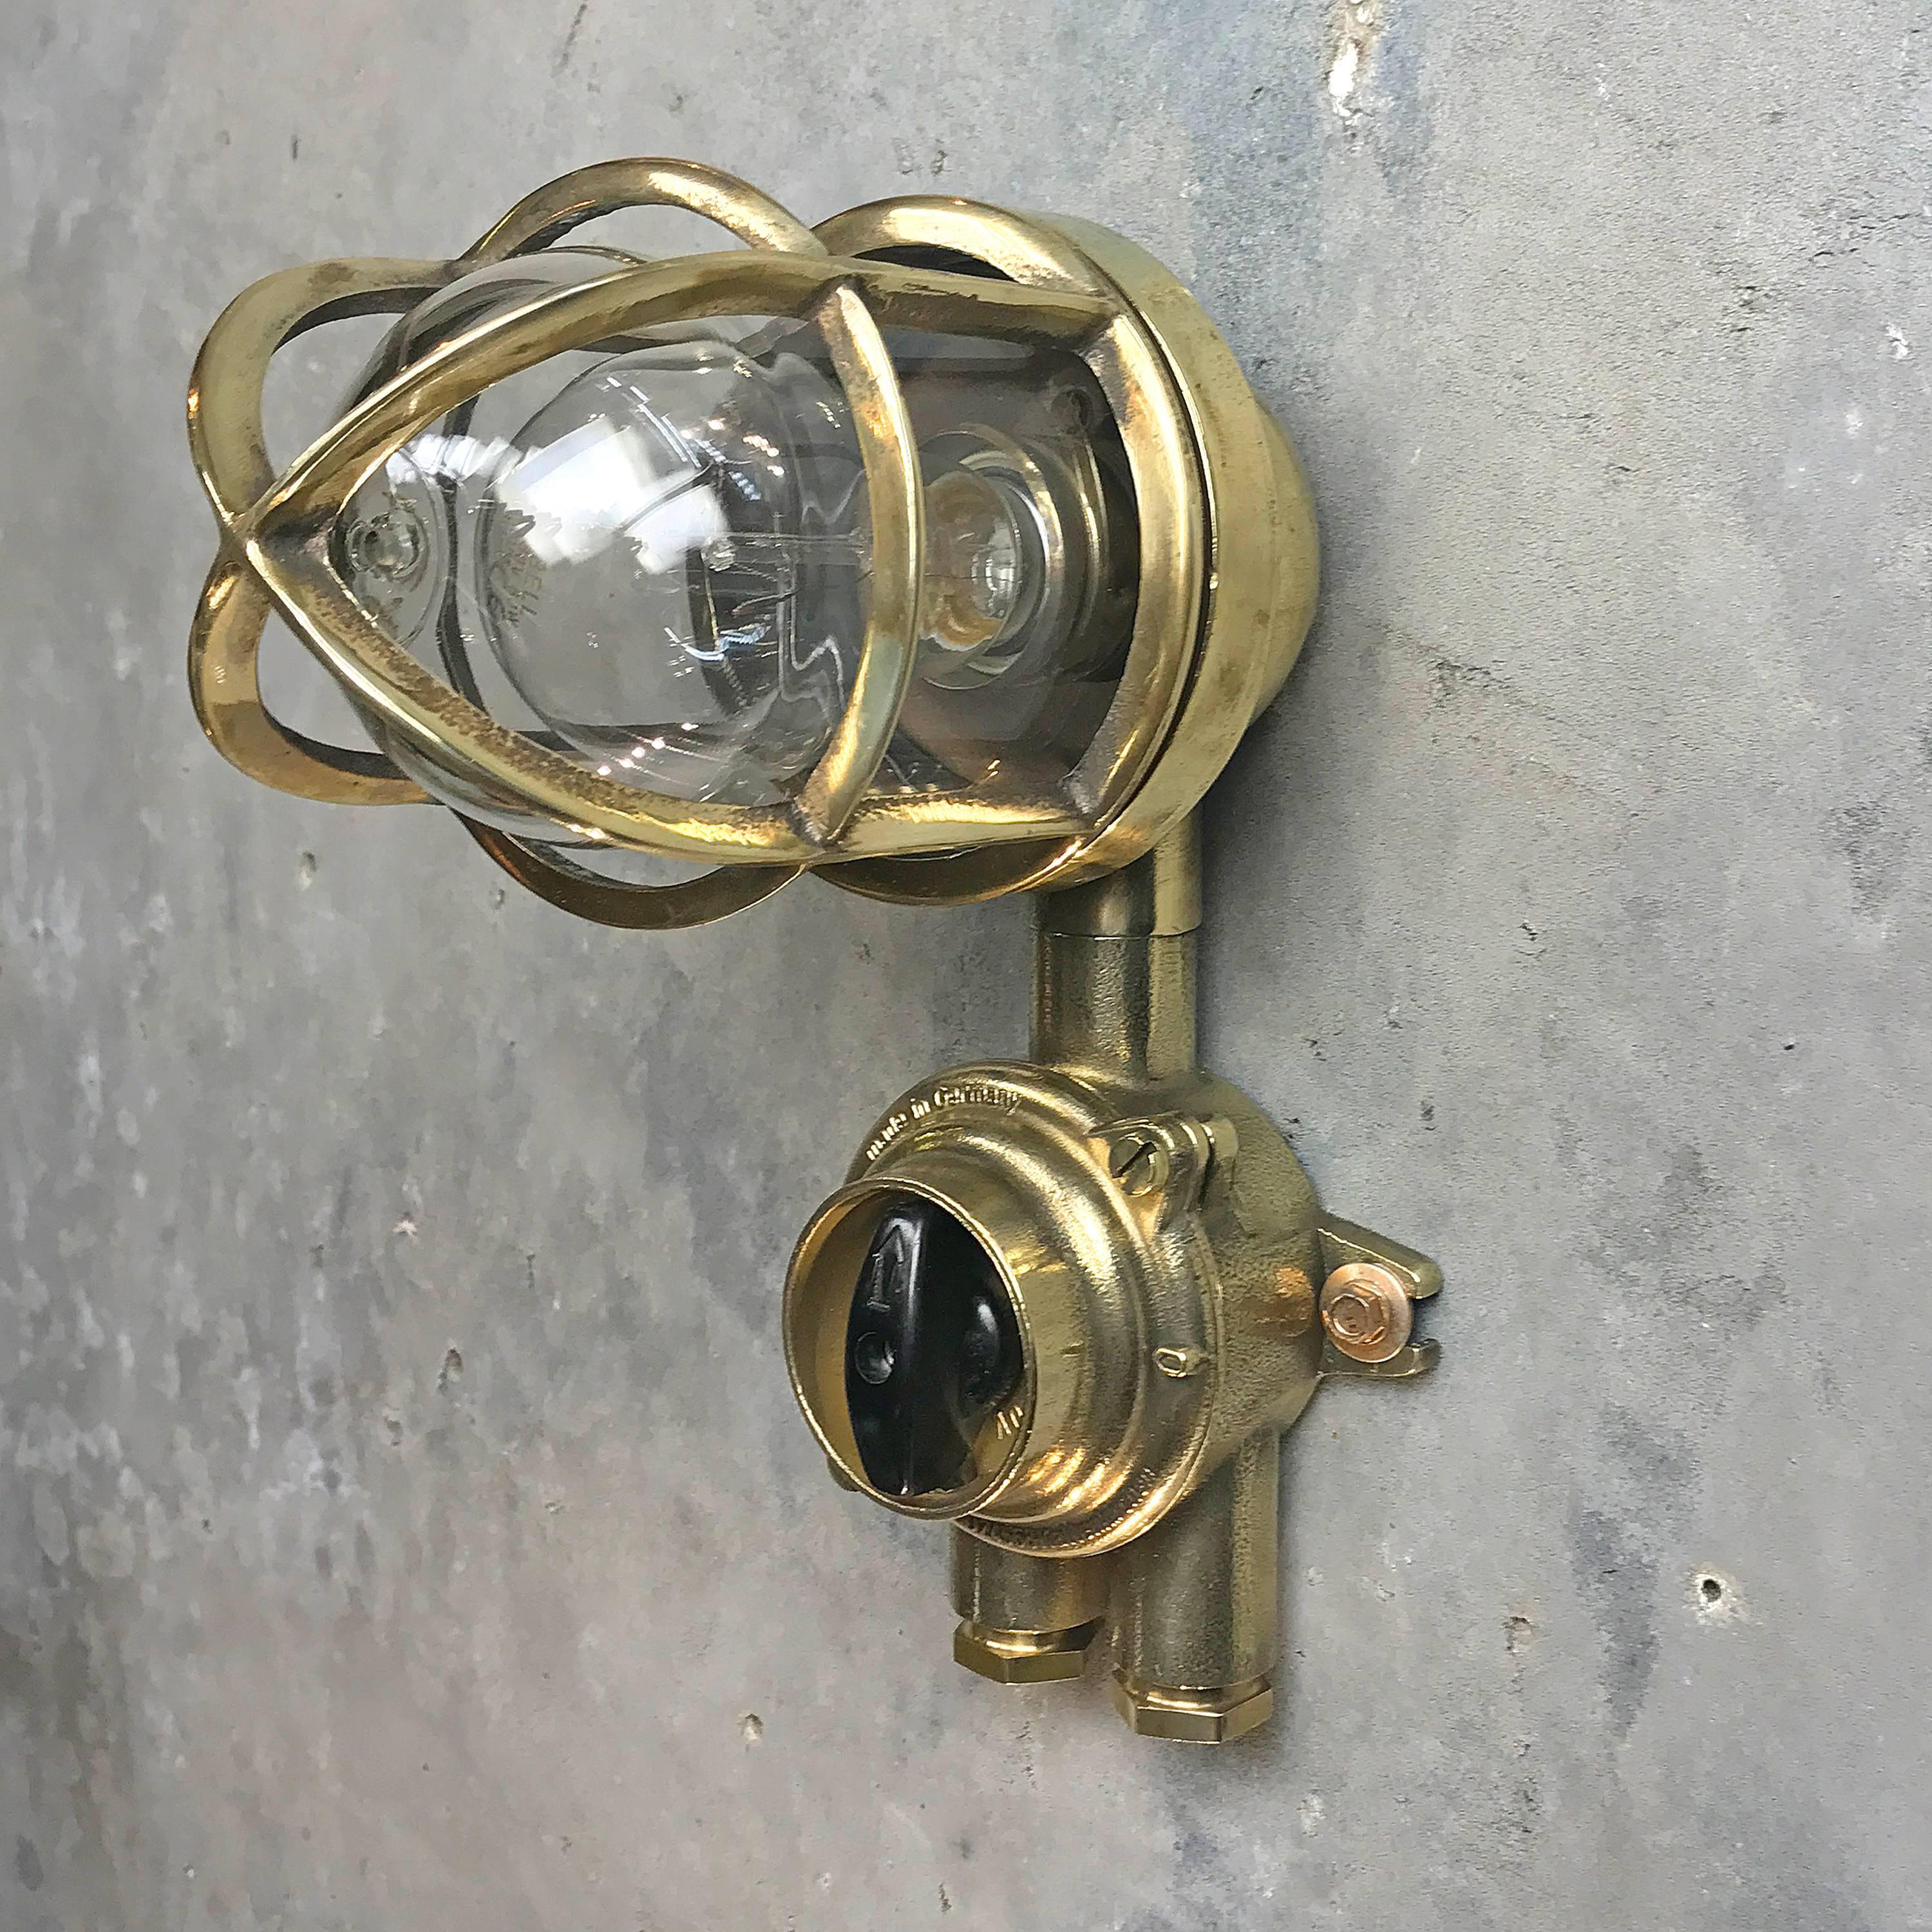 This is a very stylish 90 degree wall light, sold ready for use with a 40watt E27 vintage filament bulb fitted manufactured by Wiska.

Reclaimed from military vessels mainly marine minesweeper ships.

The light features its own water proof